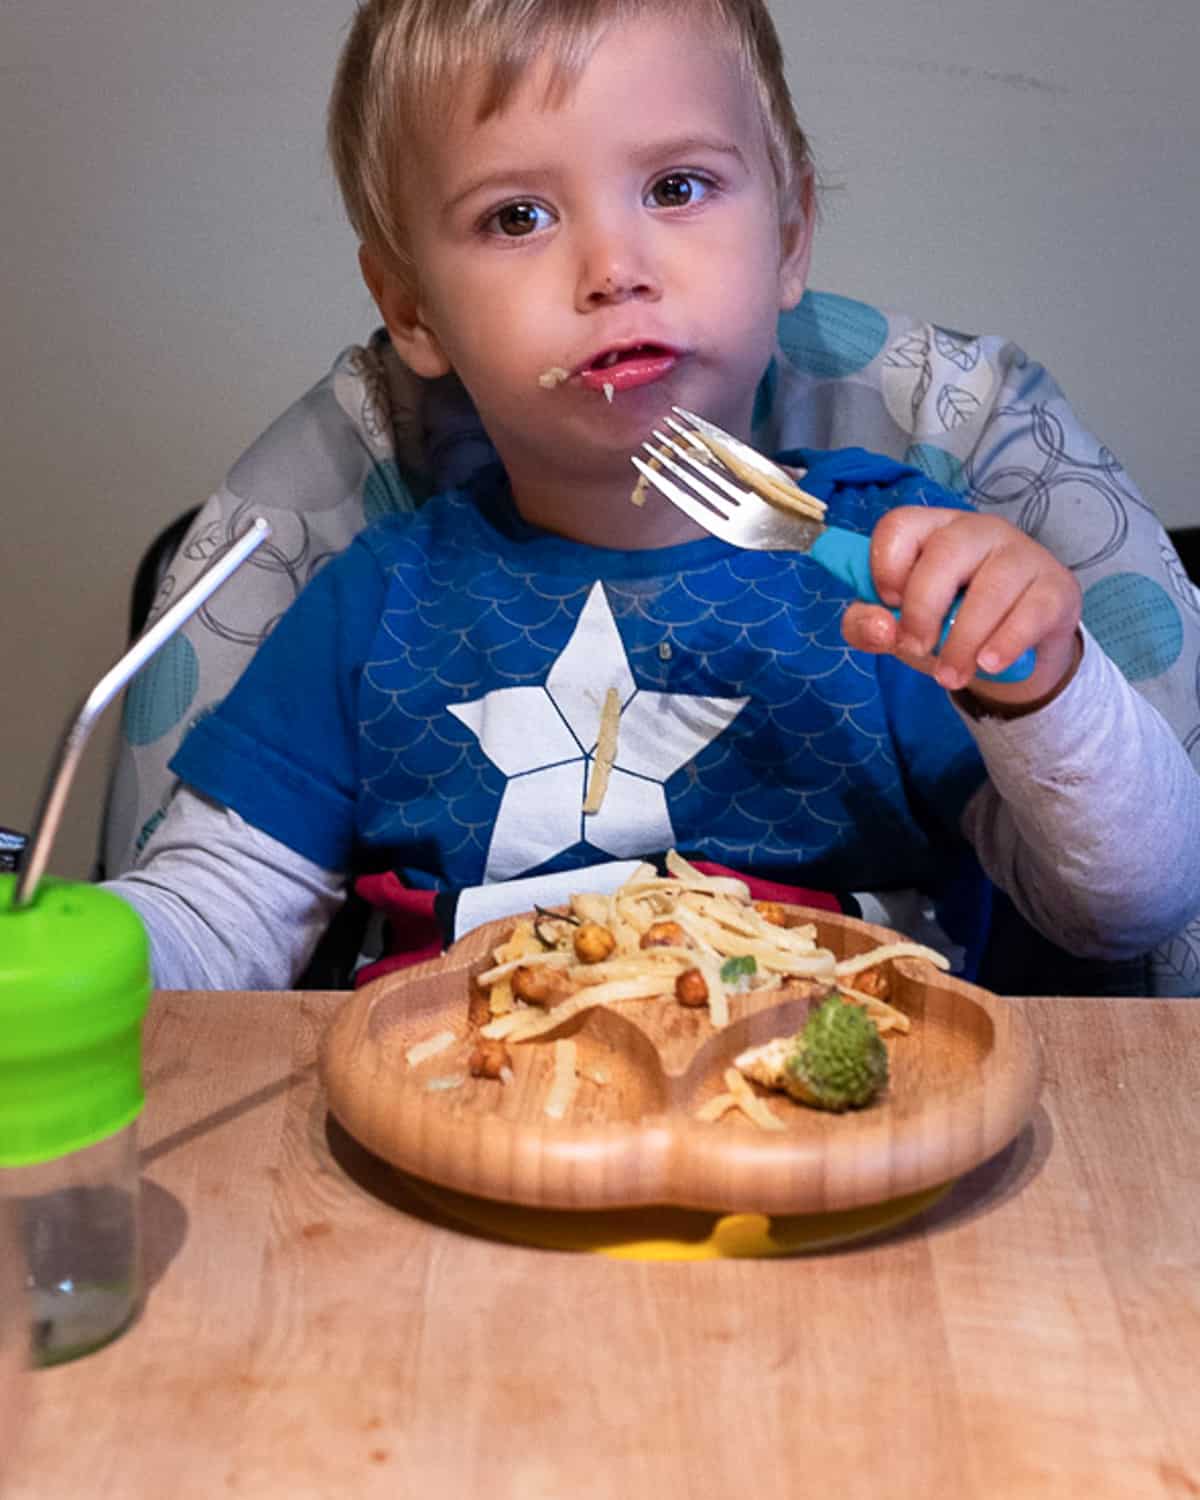 Image of a 12 month old eating a vegan meal.